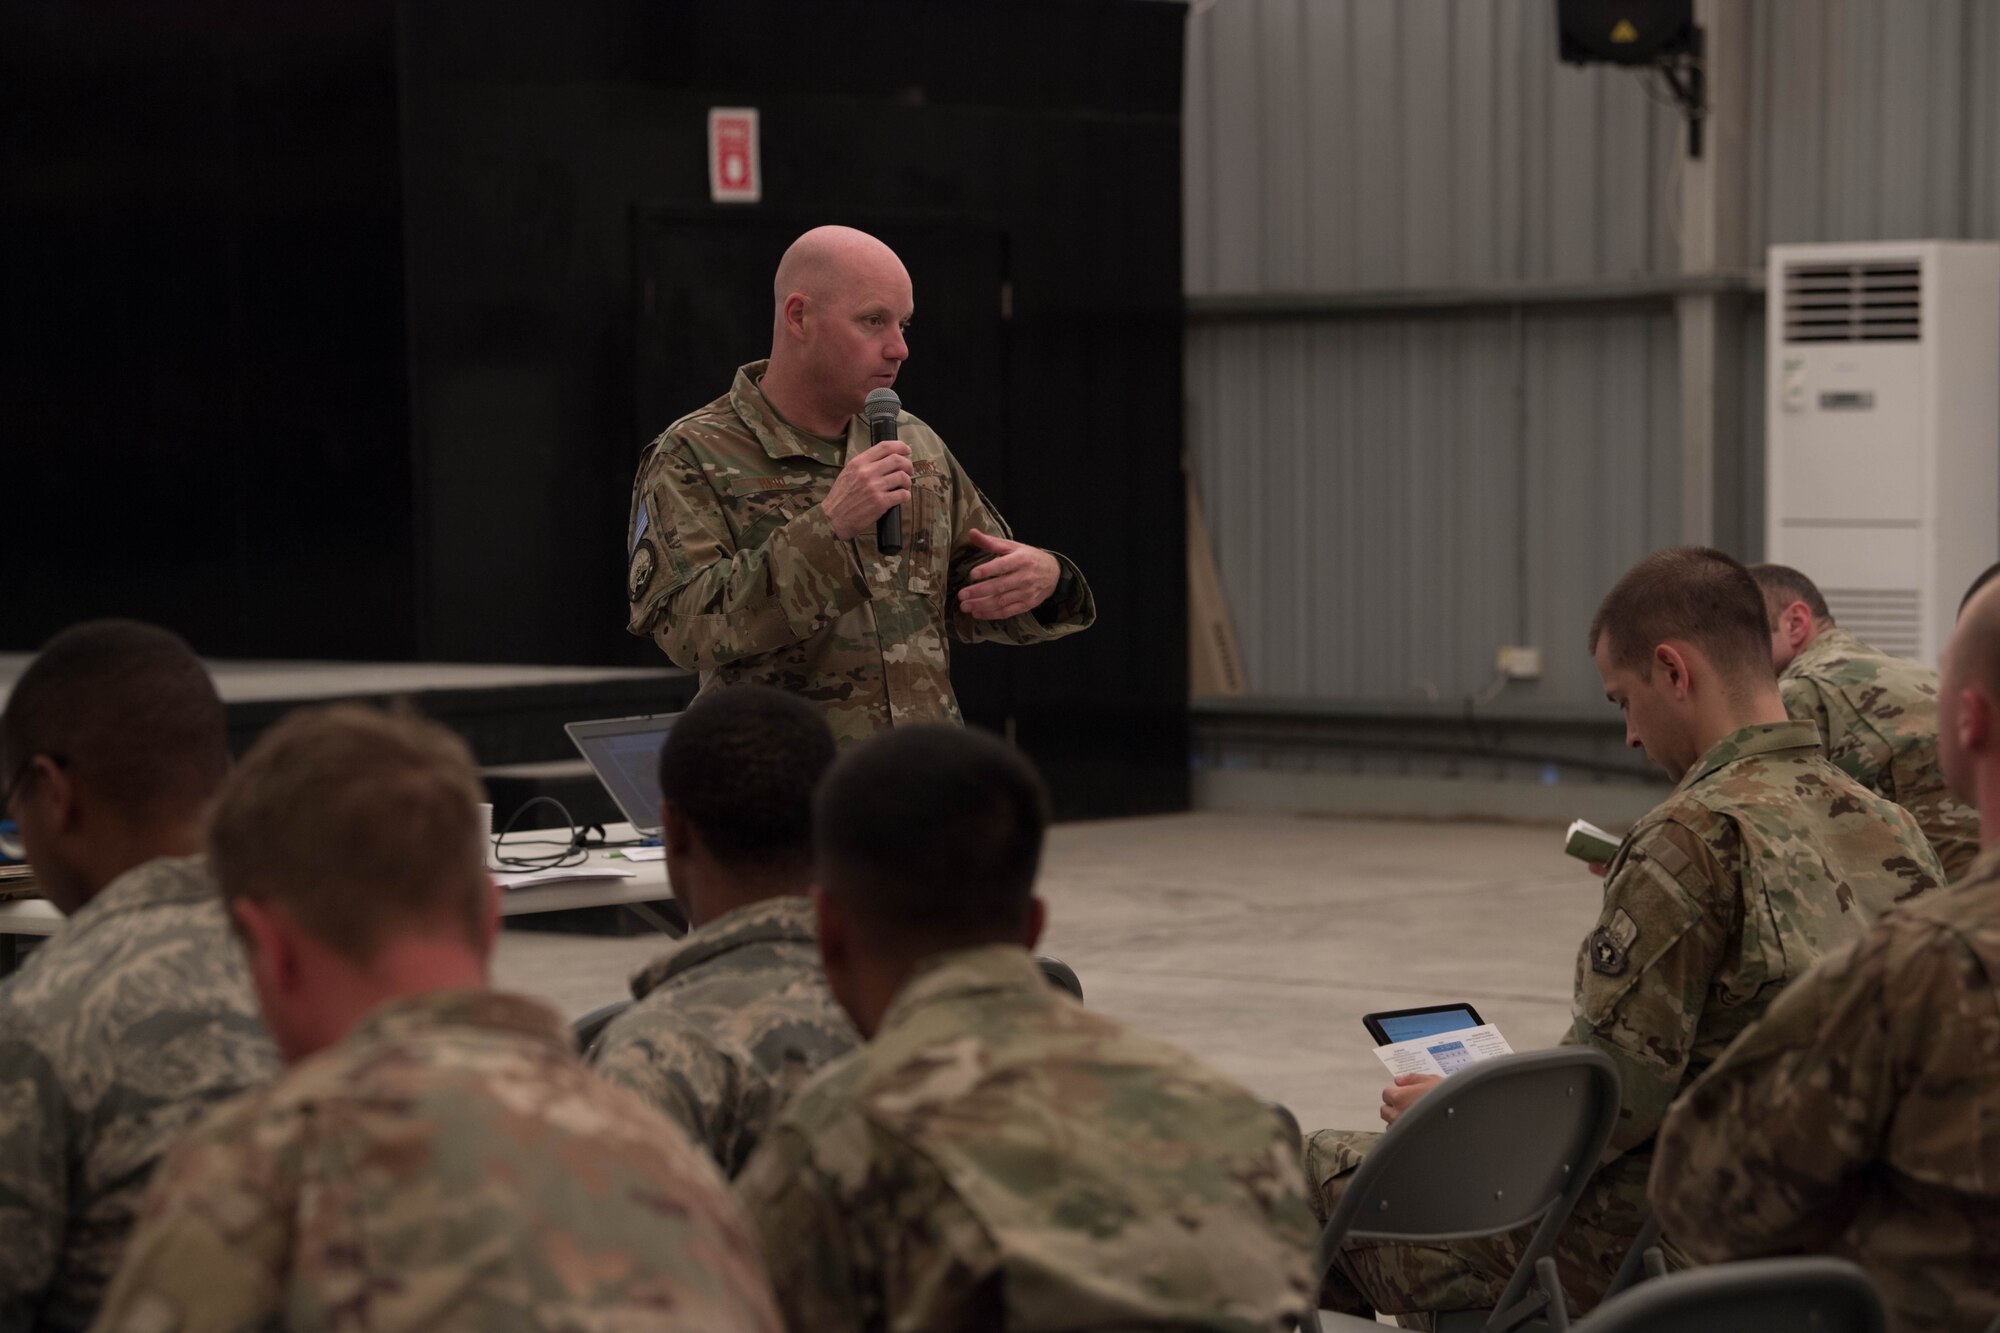 Col. Cory Reid, Senior Air Reserve Component advisor, speaks to Air Reserve and Air National Guard members at a town hall meeting on Al Dhafra Air Base, Aug. 9, 2018.  Reid, along with Lt. Col. Andrew Frankel, Deputy Air Reserve Component advisor, visited Reserve and Guard members in the 380th Air Expeditionary Wing to inform them on their entitled benefits and address any concerns members may have while deployed. (U.S. Air Force photo by Staff Sgt. Erica Rodriguez)